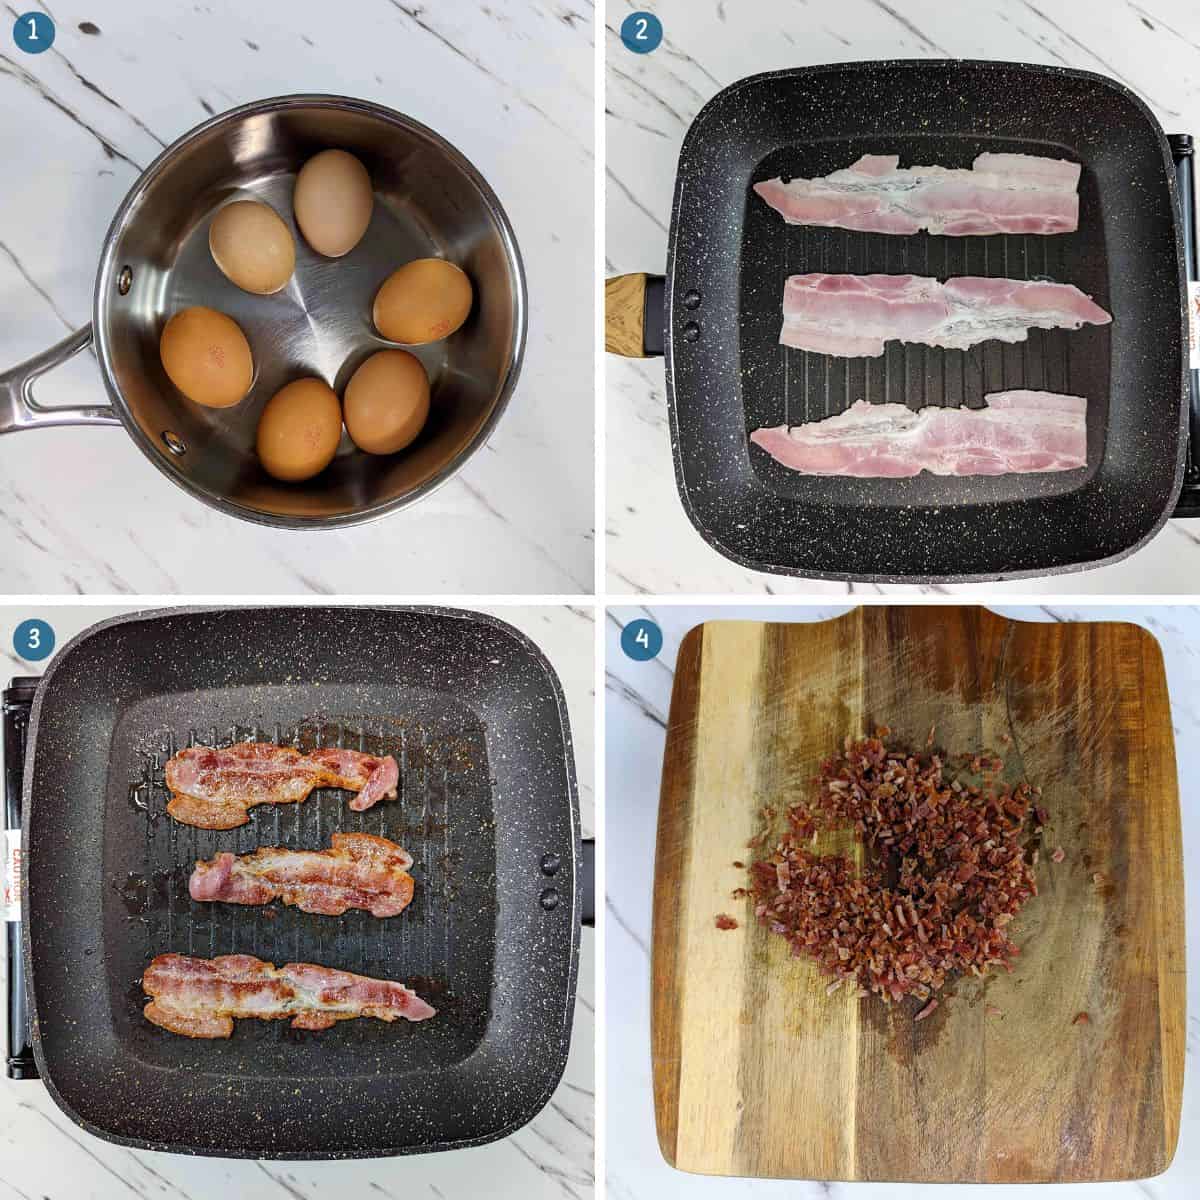 cooking-the-eggs-and-bacon